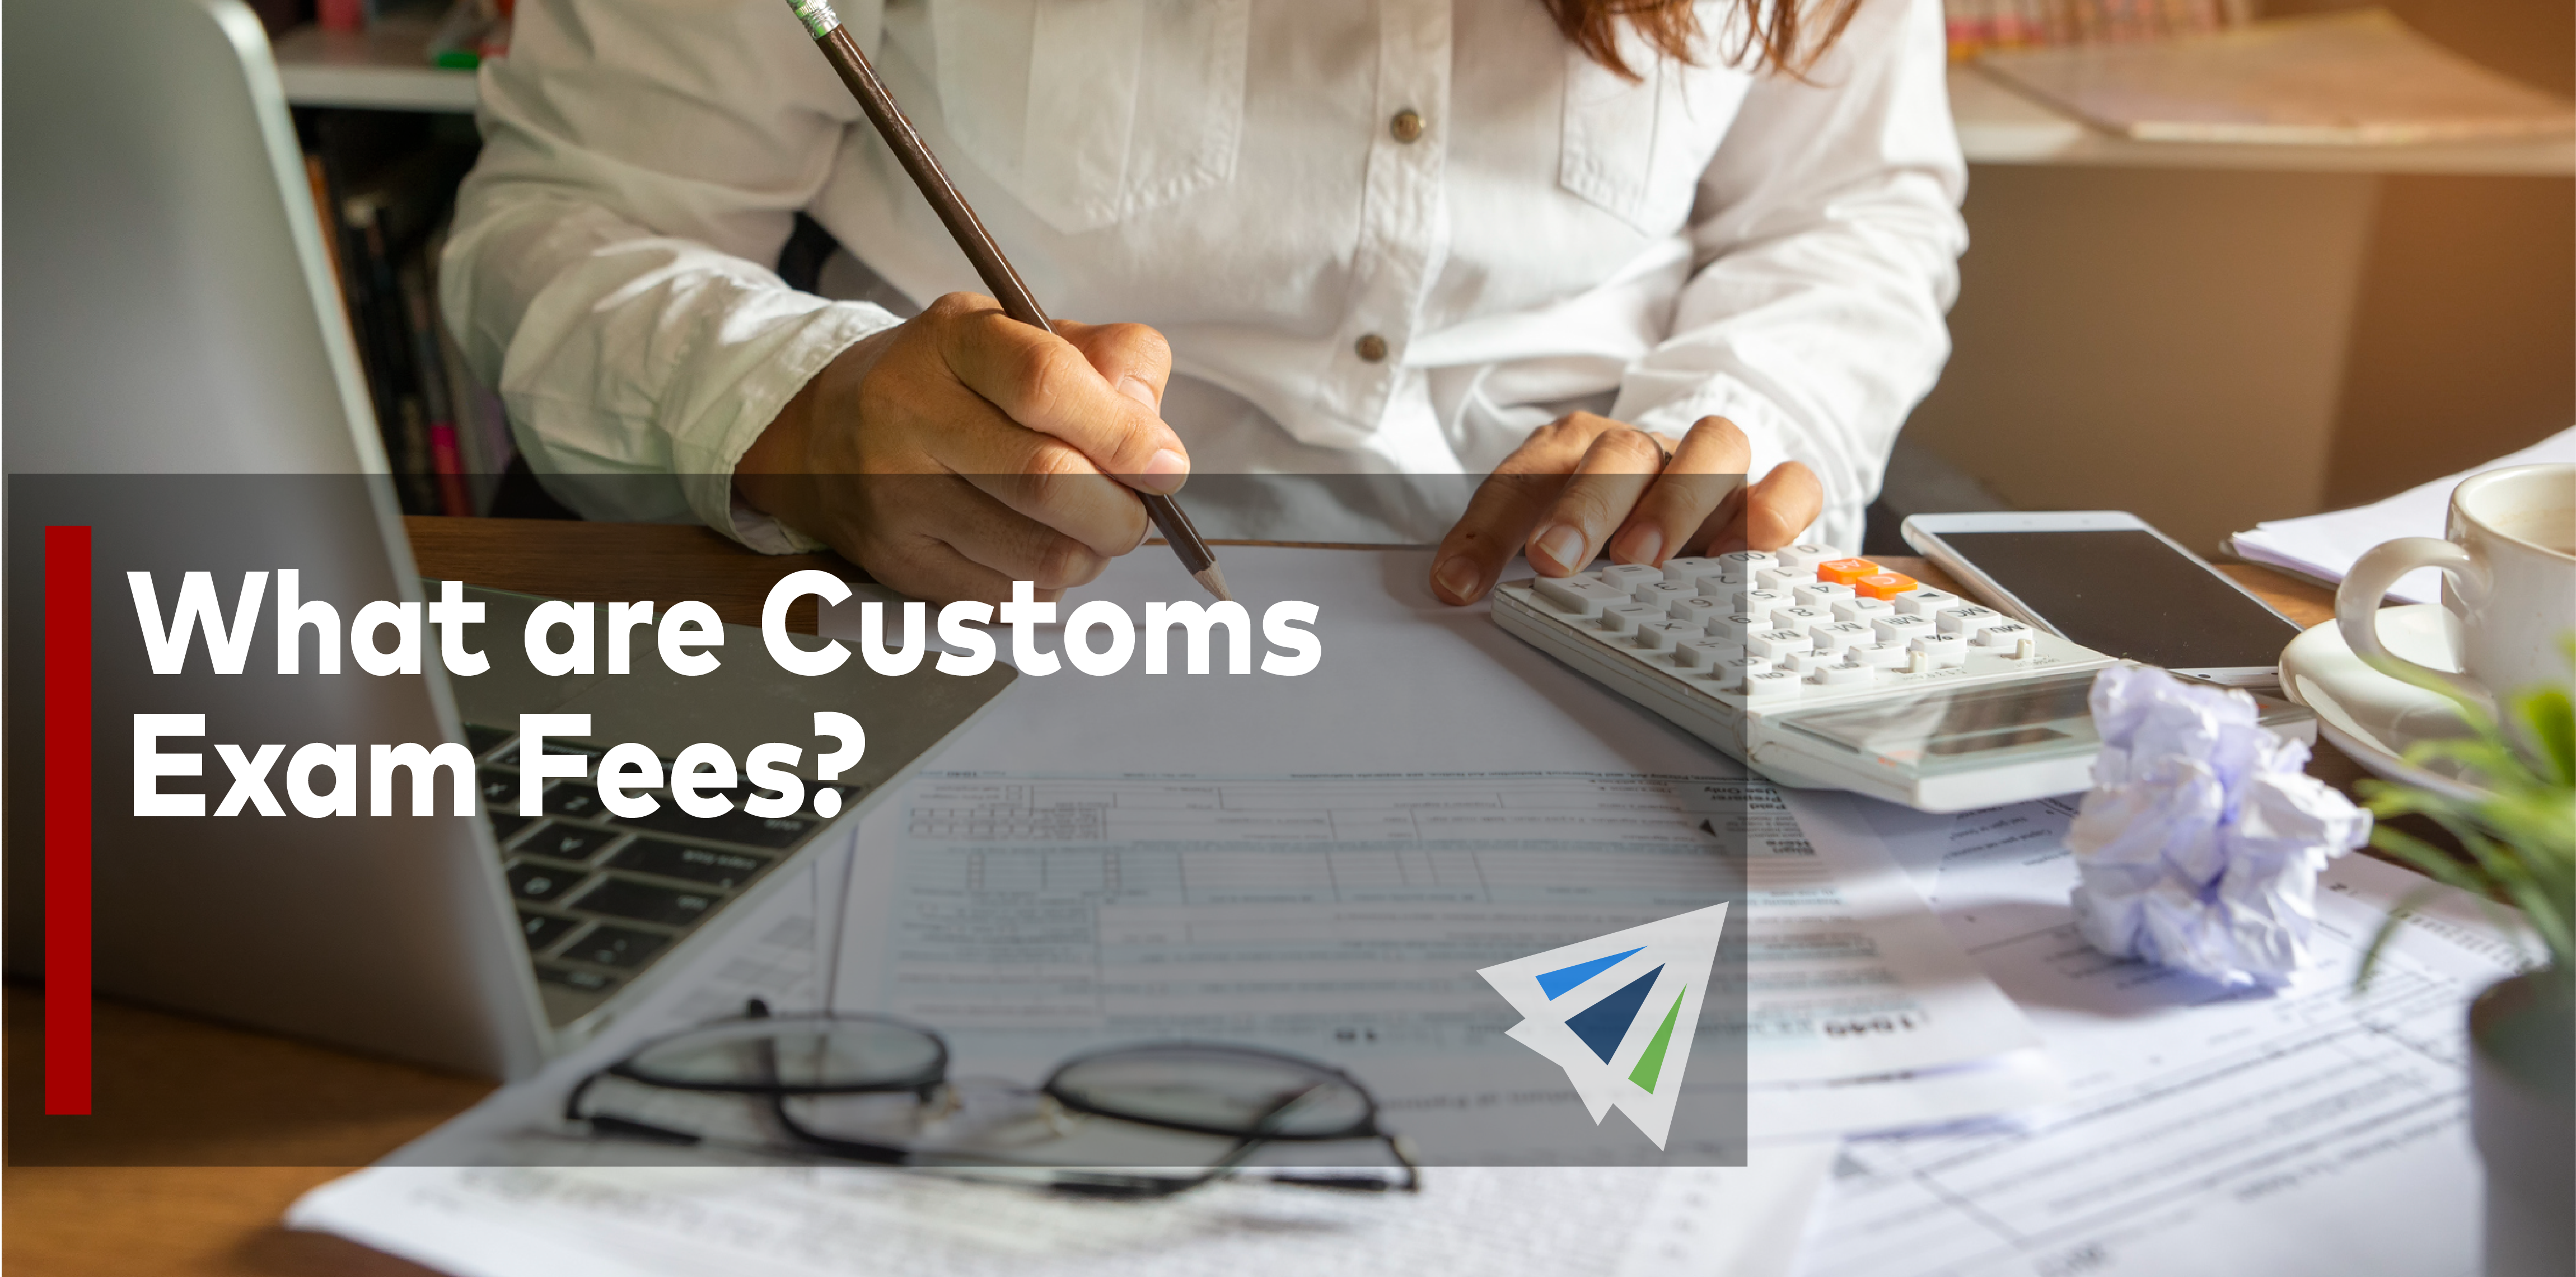 What Are Customs Exam Fees?